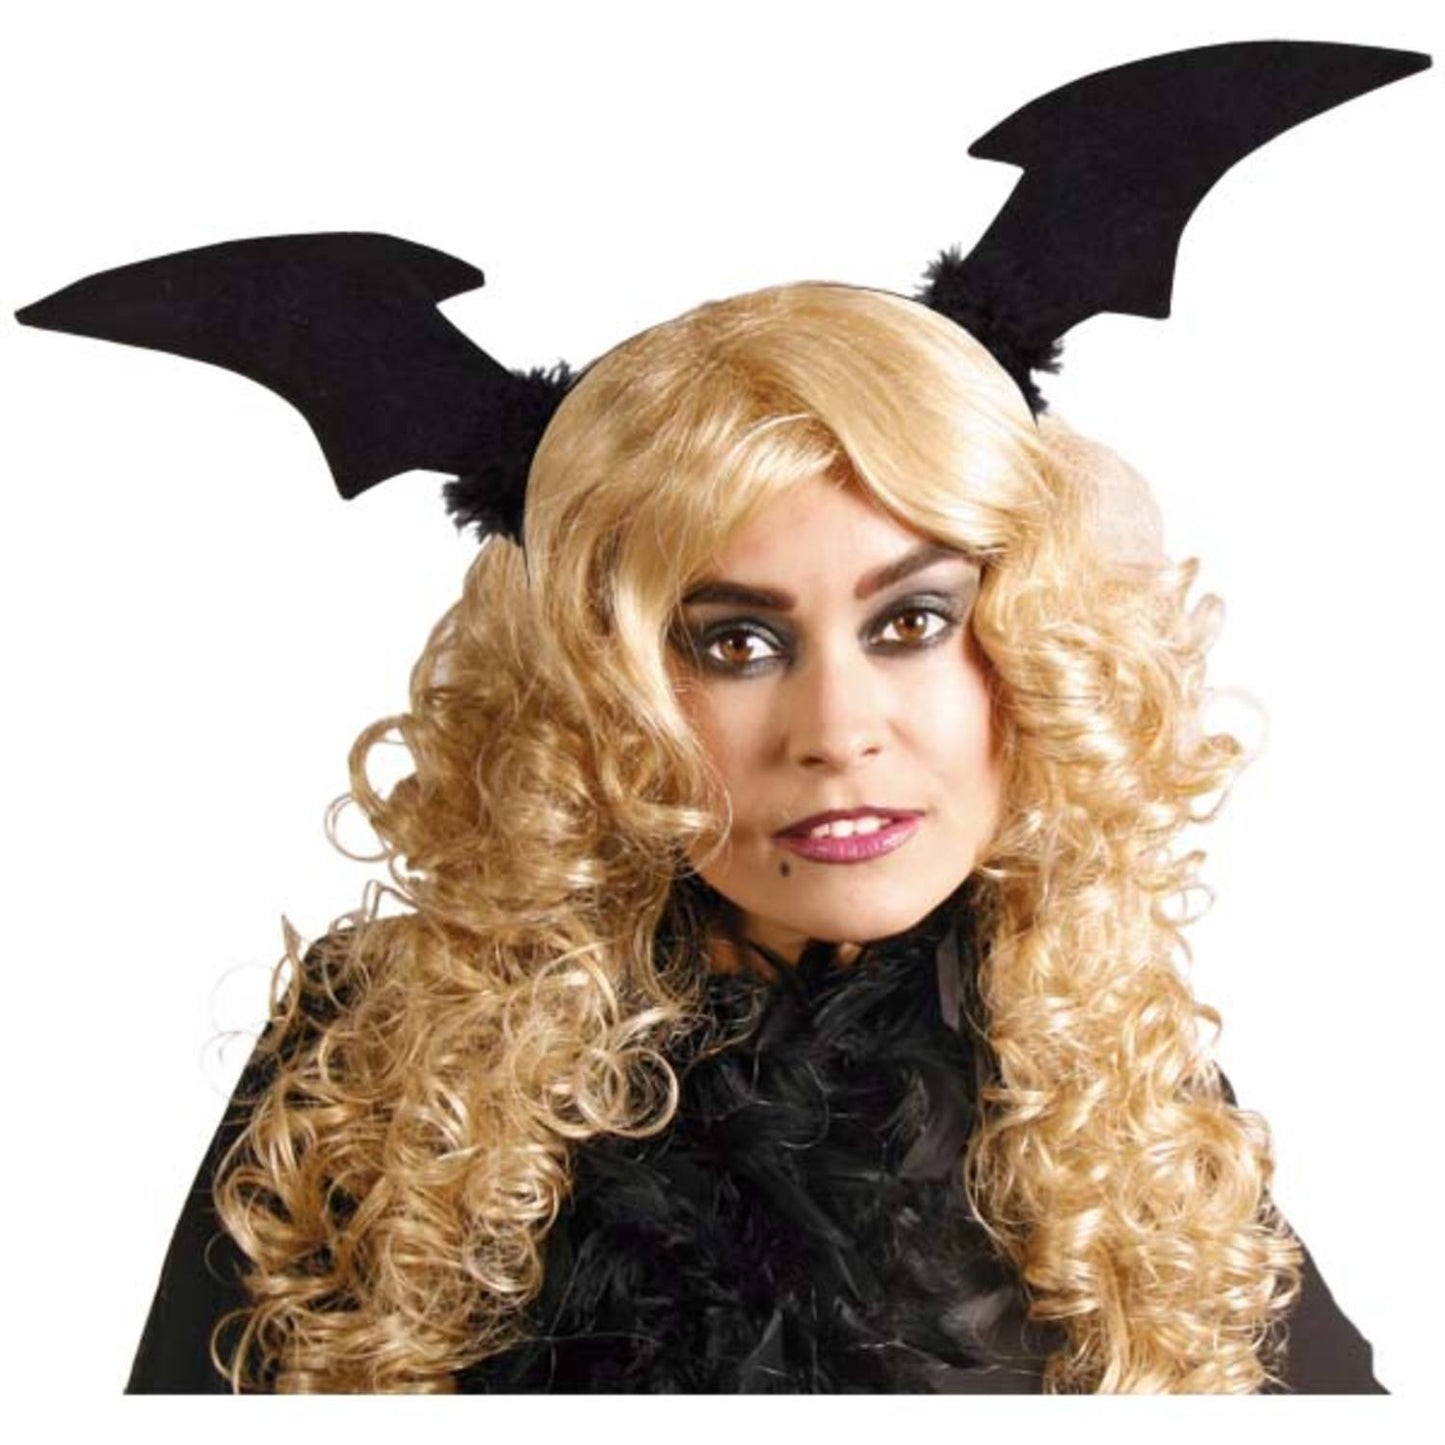 Tiara Bat Wings - Enchanting Accessory for Halloween and Theme Parties